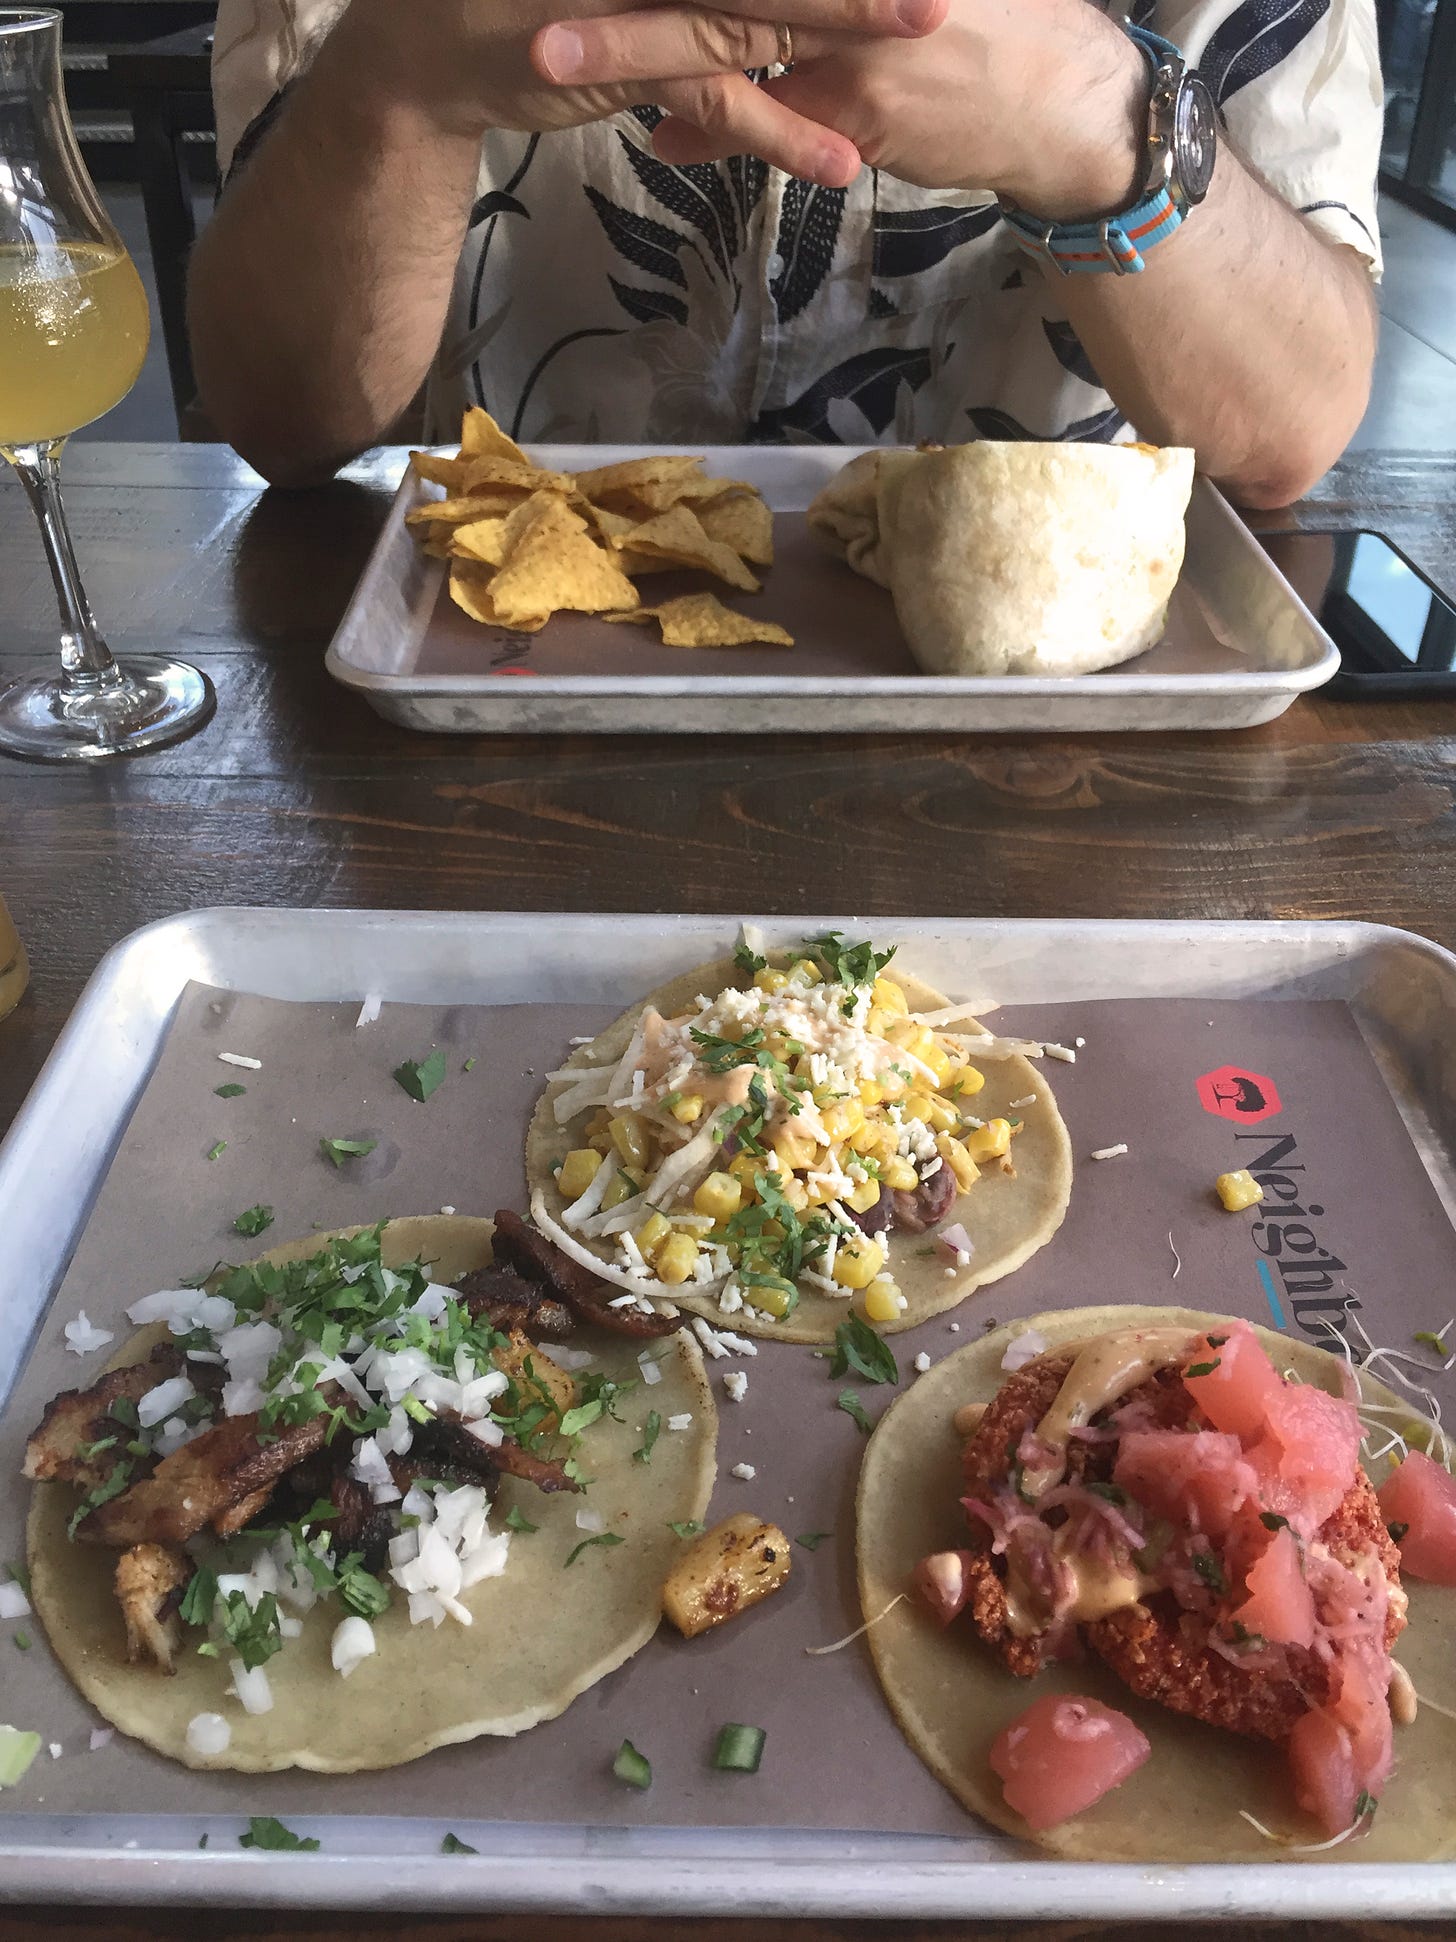 On a metal tray lined with paper are three different tacos, sprinkled with cilantro. Across the table on another tray is a burrito cut in half and a small pile of yellow corn tortilla chips. Jeff's hands are linked together overtop of the tray as his elbows rest on the table.